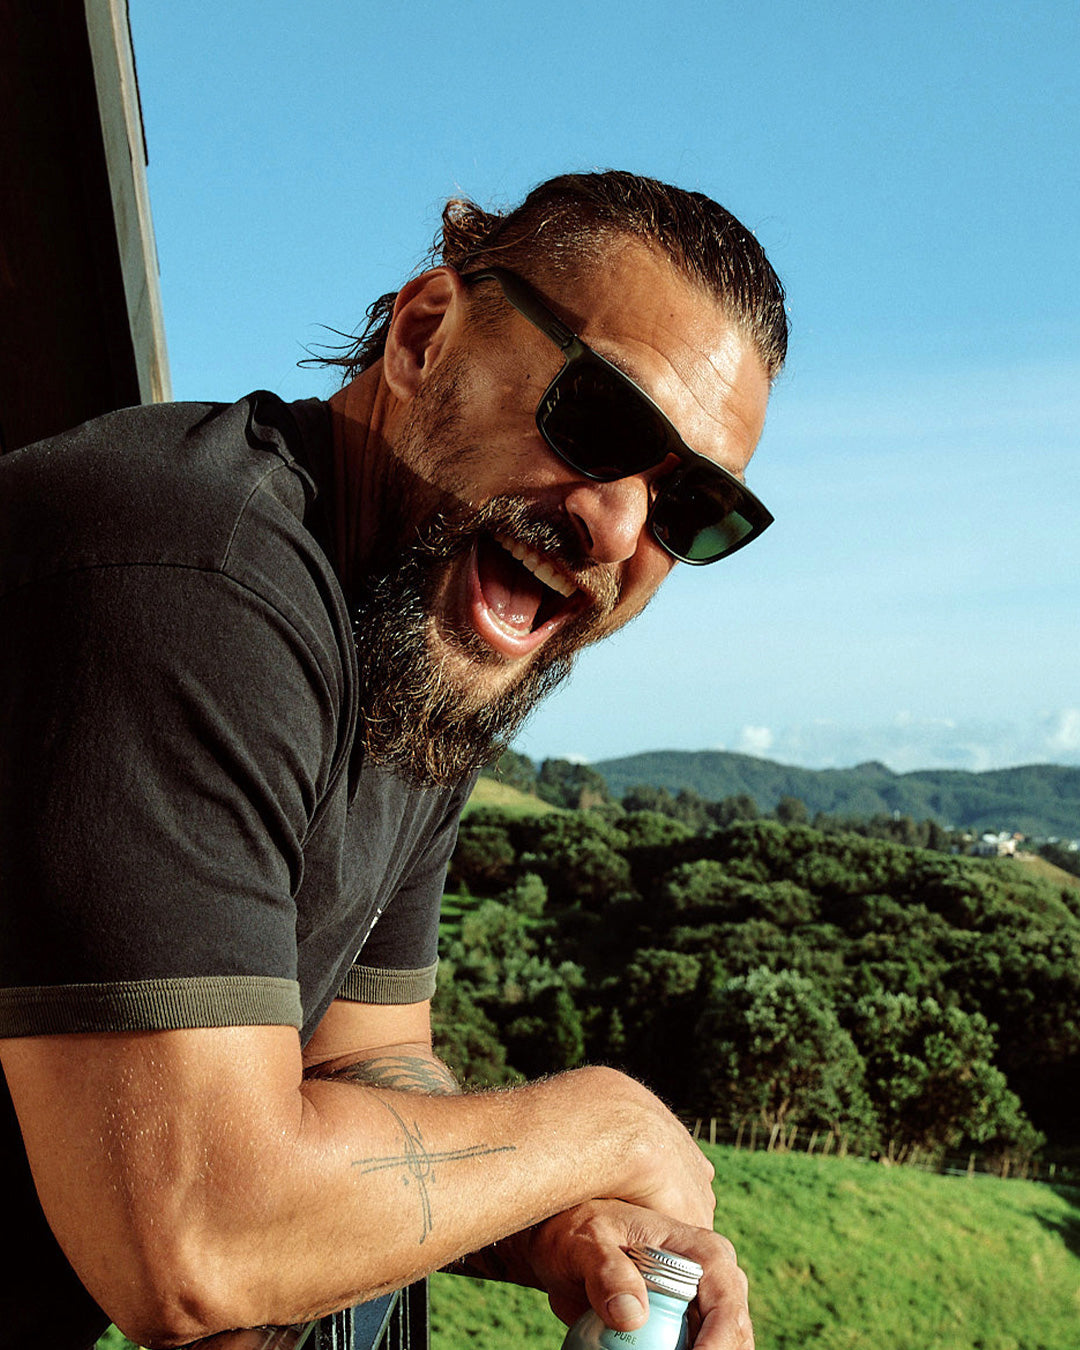 So iLL x On The Roam x Electric sunglasses by jason momoa shown being worn by jason momoa while looking over a ledge